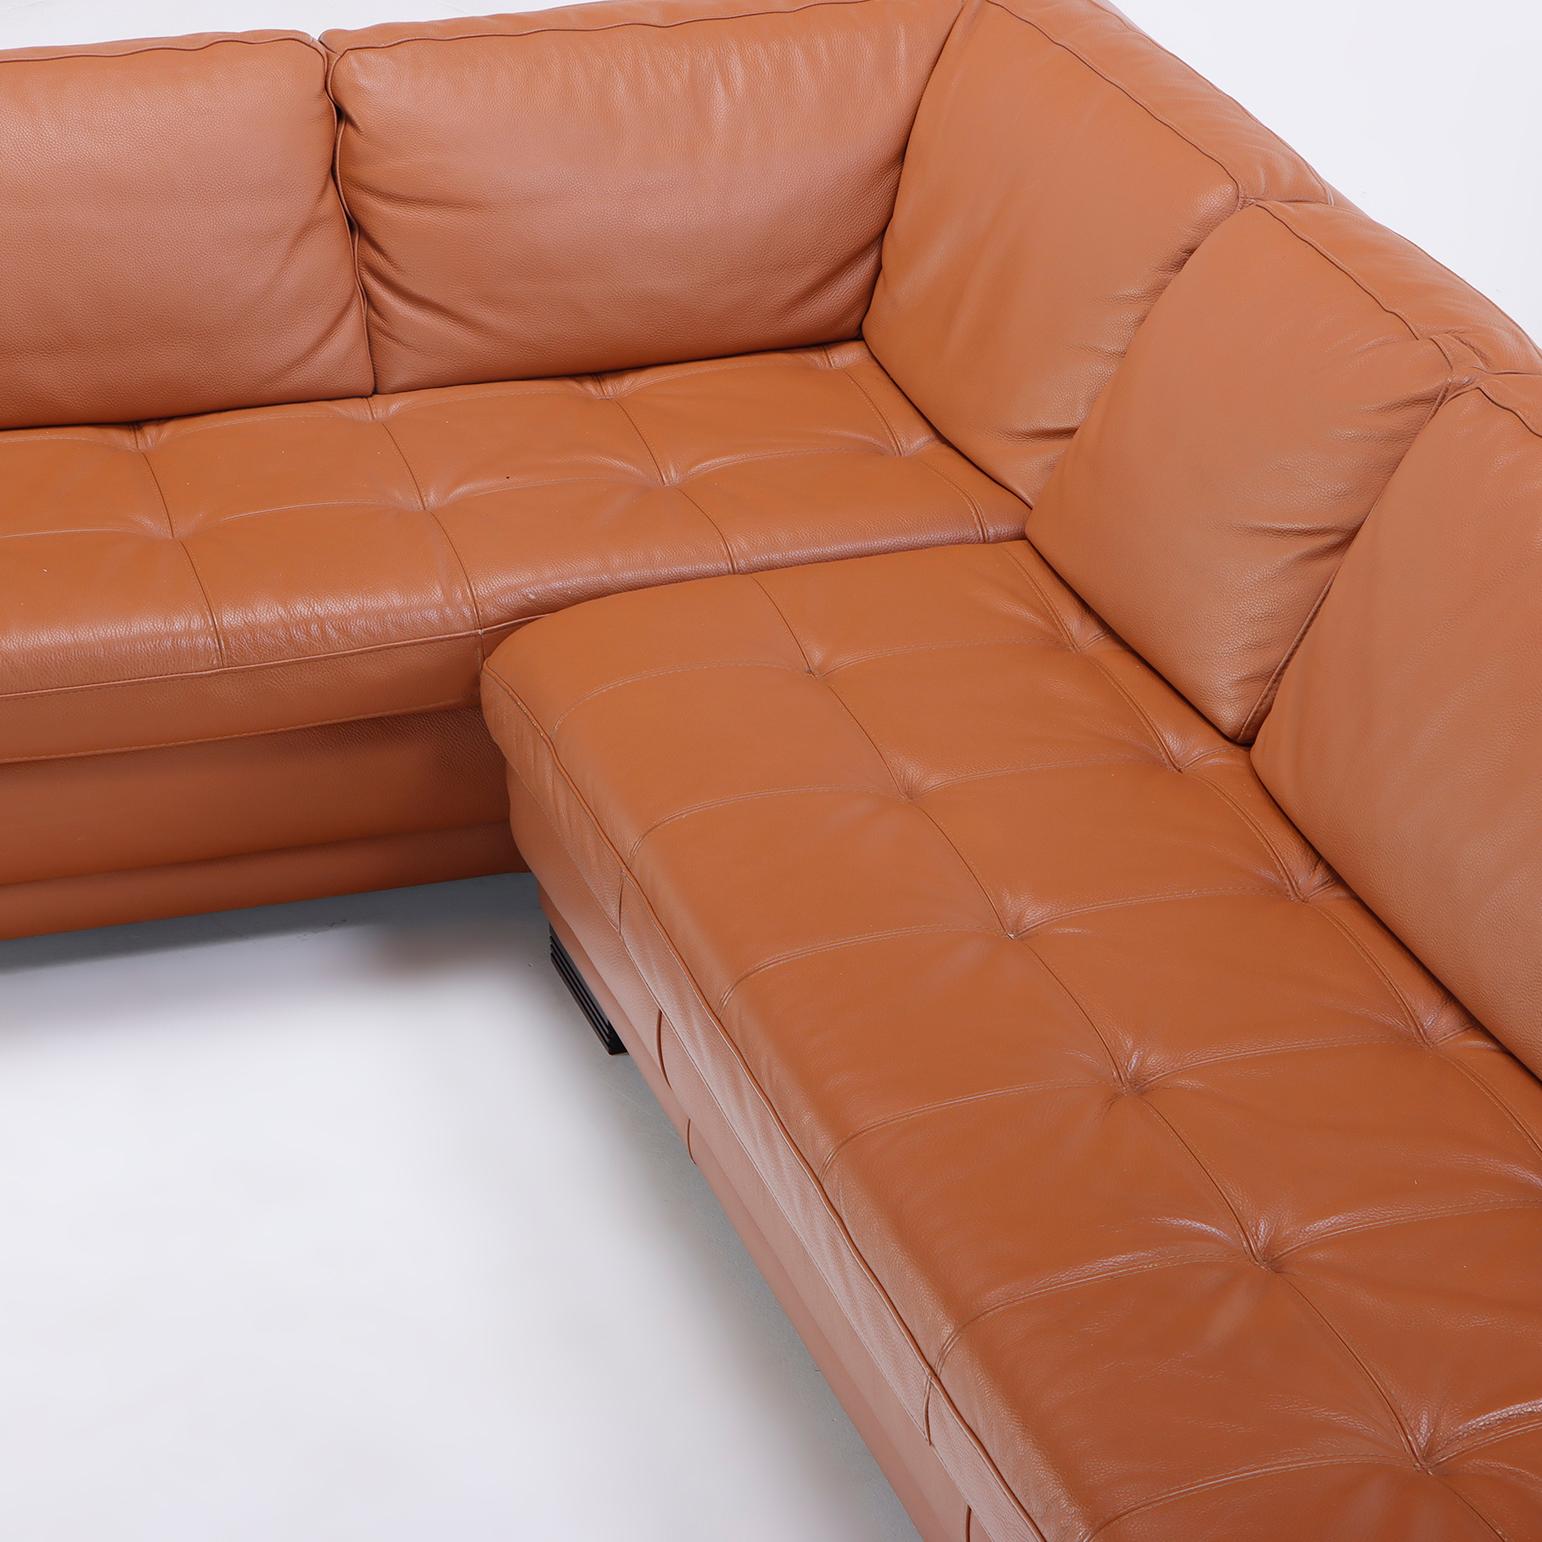 Leather A French Roche Bobois leather sectional sofa. For Sale